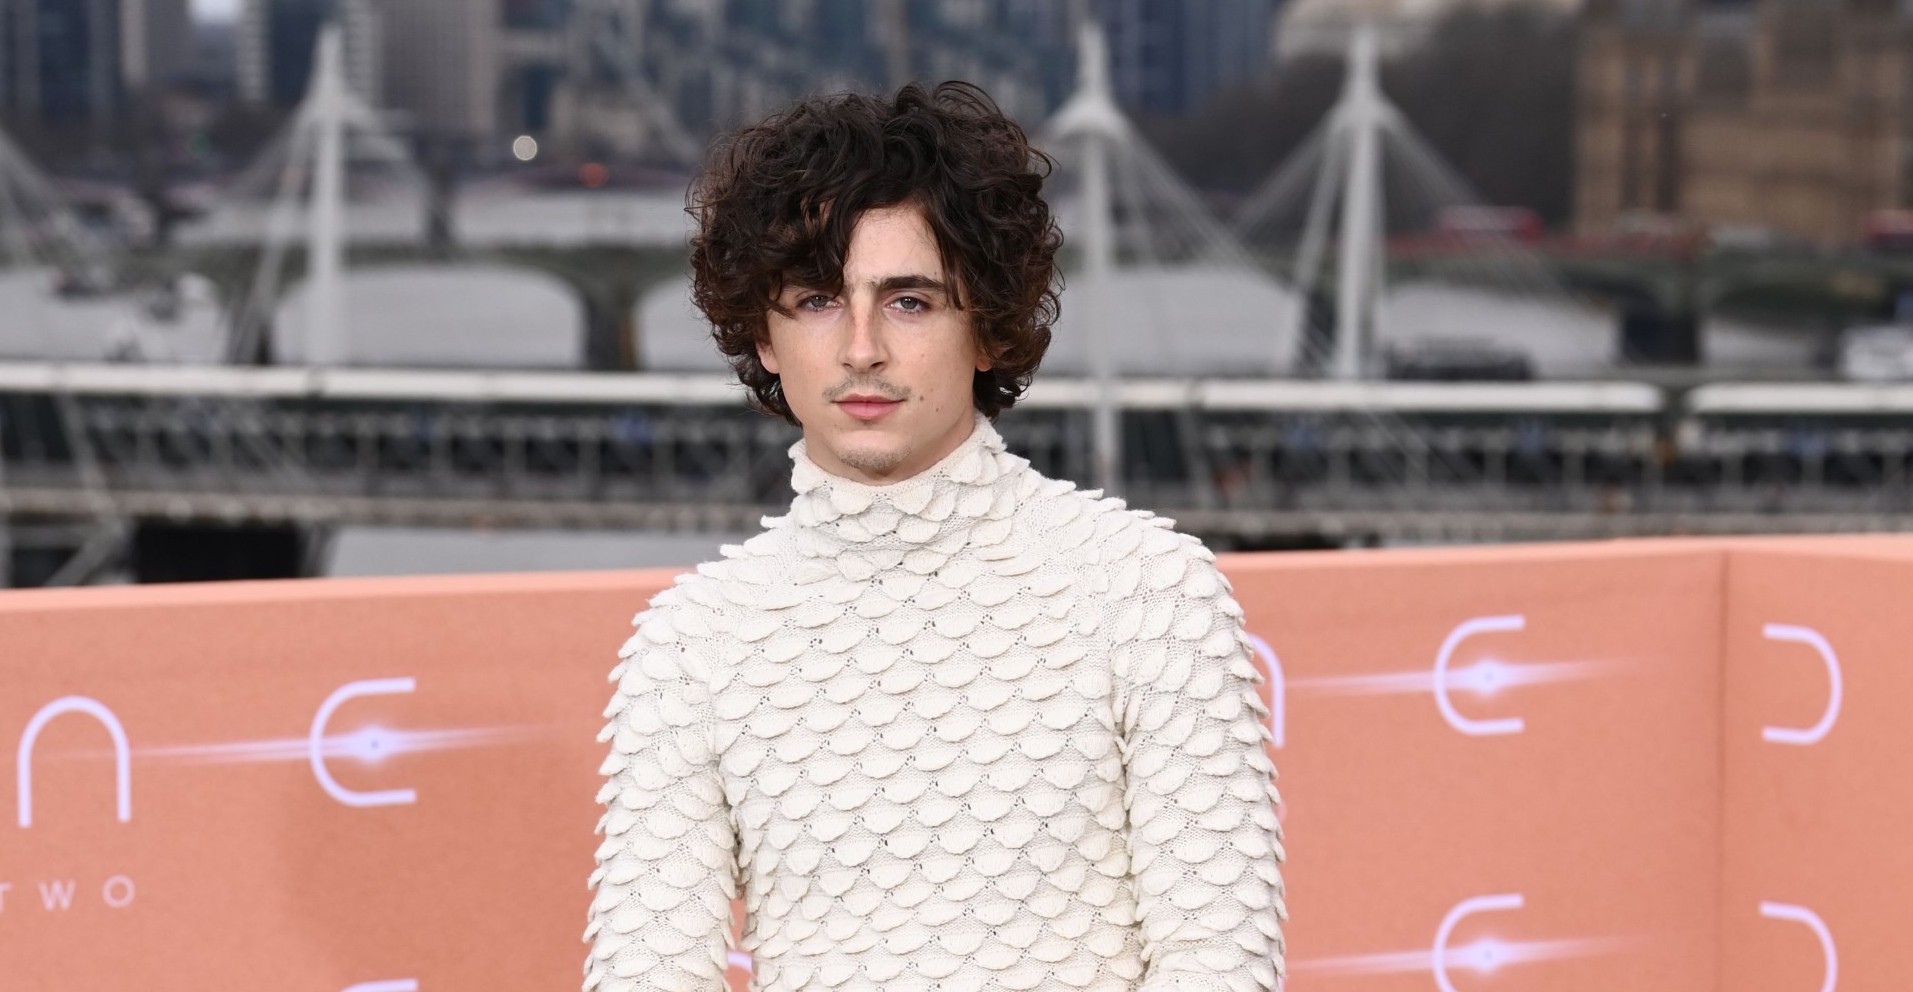 Actor Timothée Chalamet at the 'Dune: Part 2' London premiere, standing confidently on an orange carpet. He is dressed in a textured white wool jumper with a fish scale pattern, paired with sleek brown leather trousers and matching boots, with the Millennium Bridge in the background.